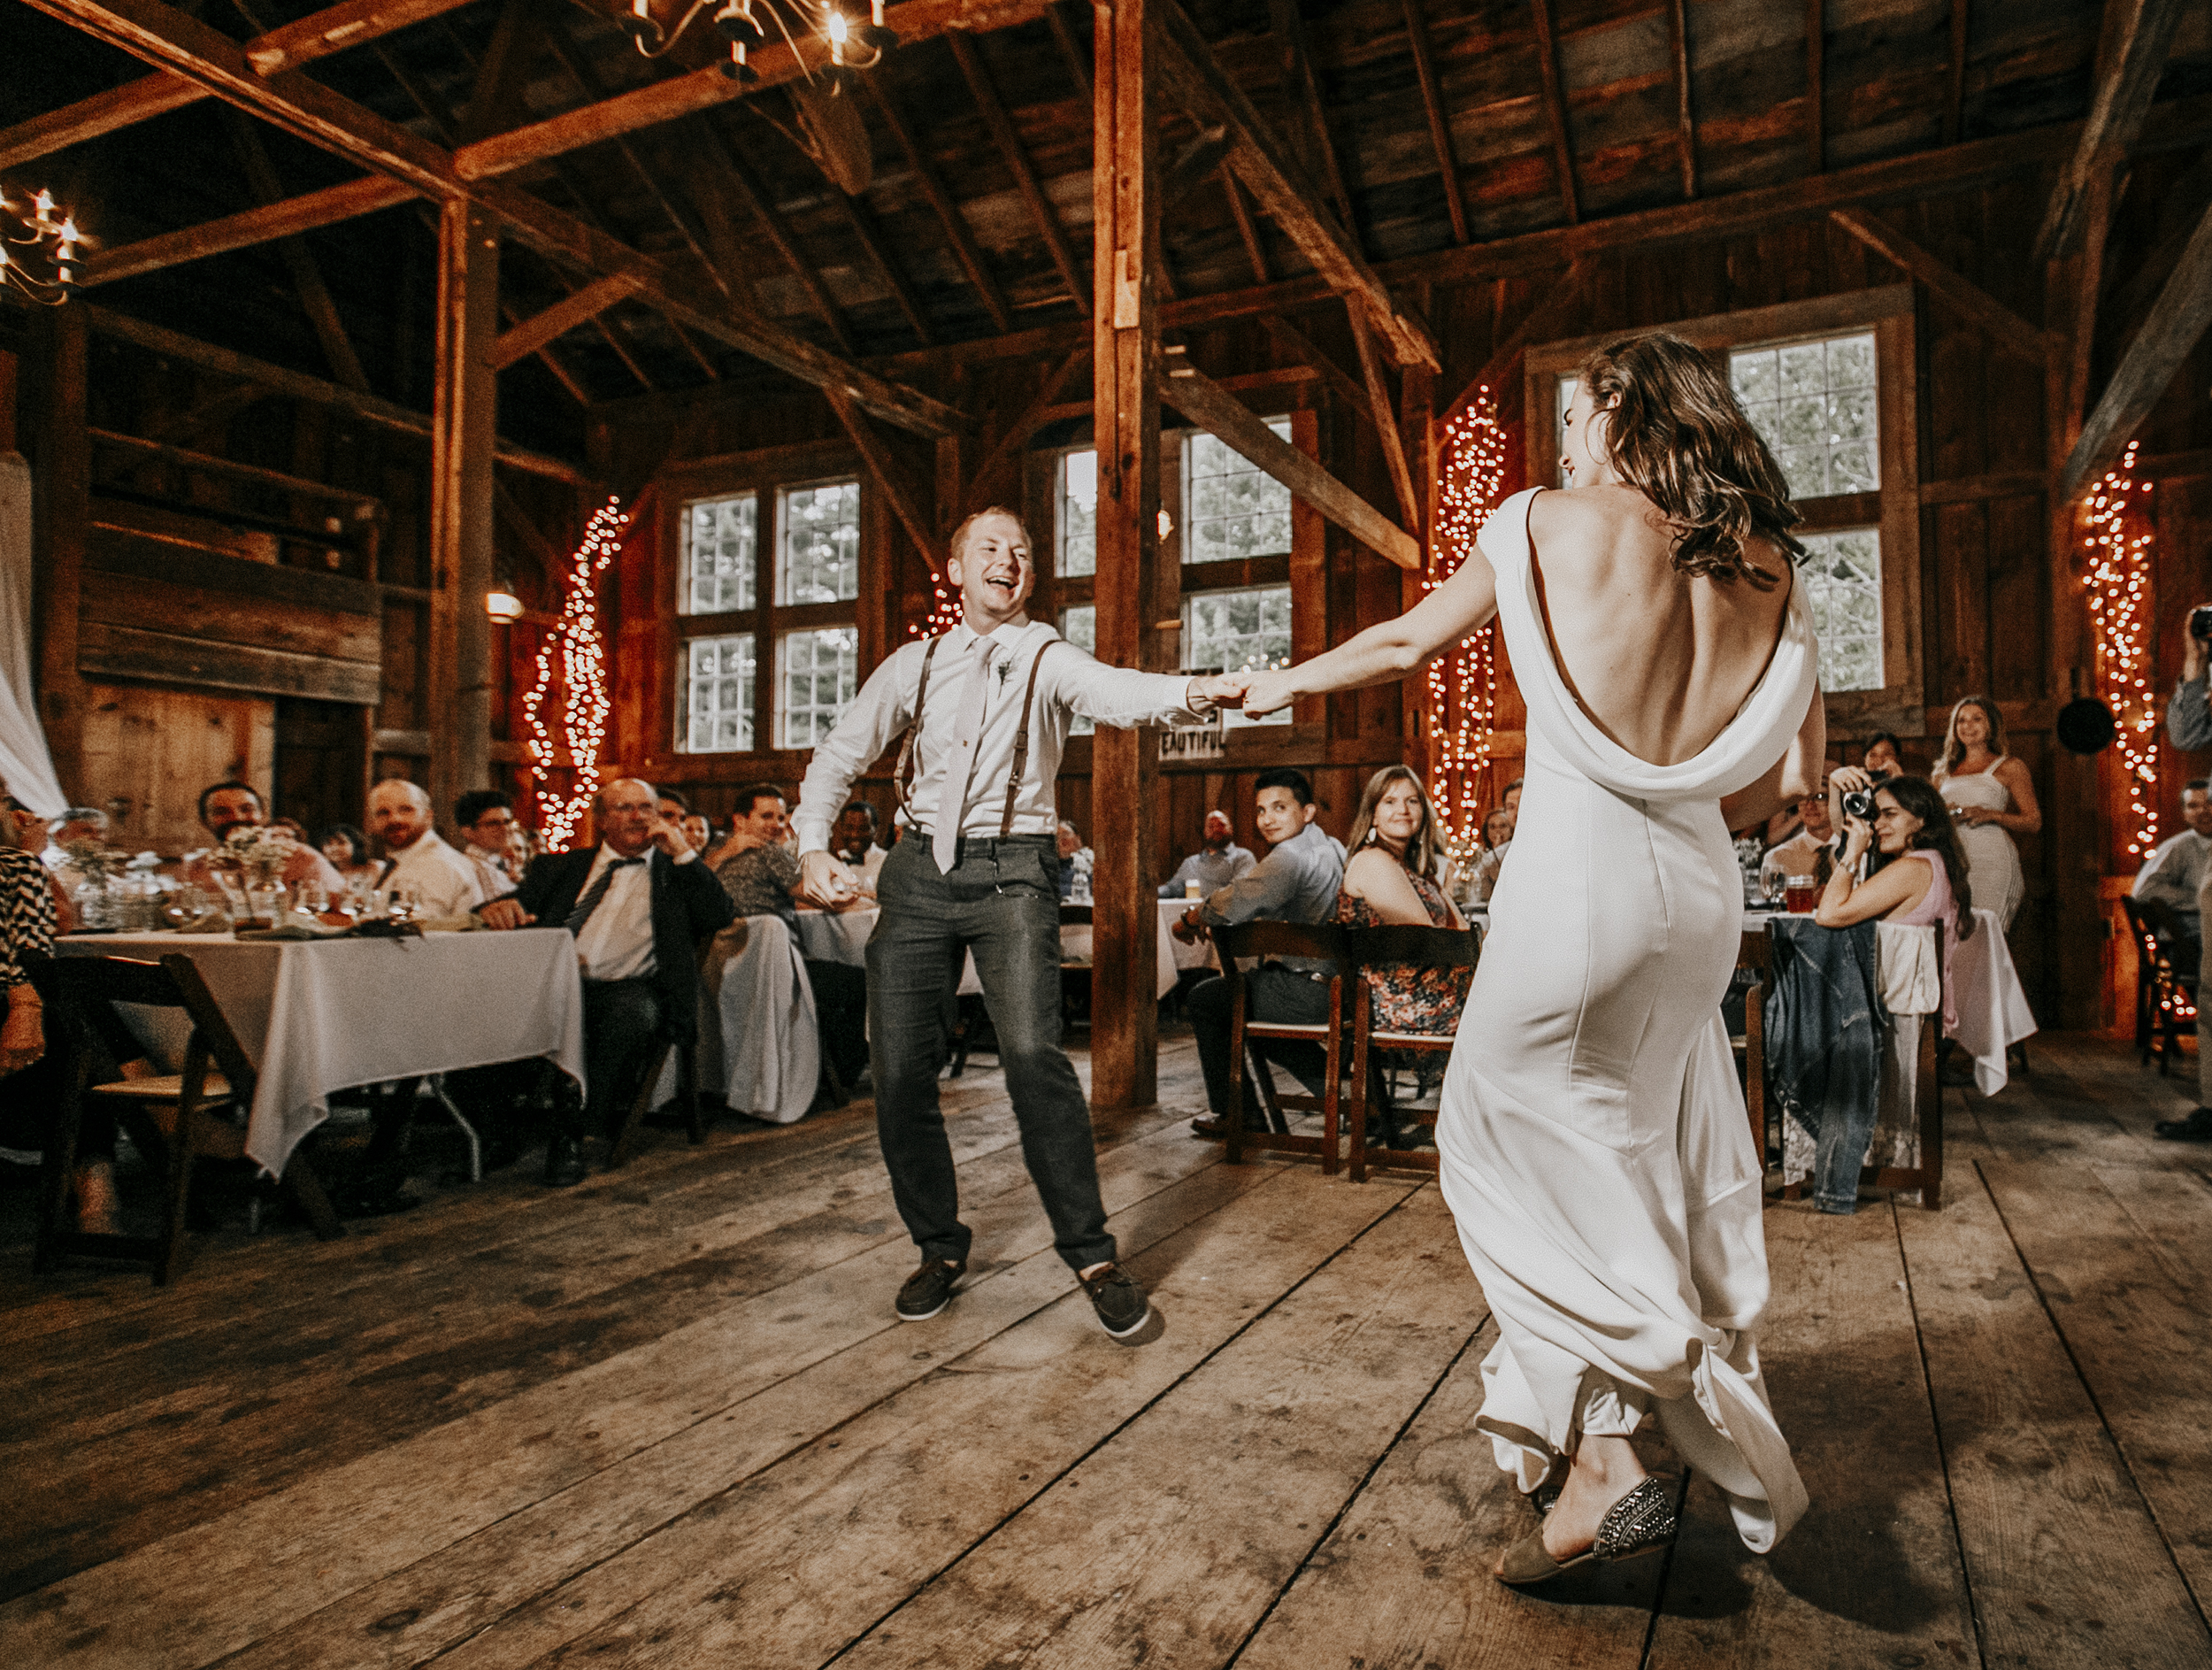 A couple's first dance in the barn at Josias River Farm